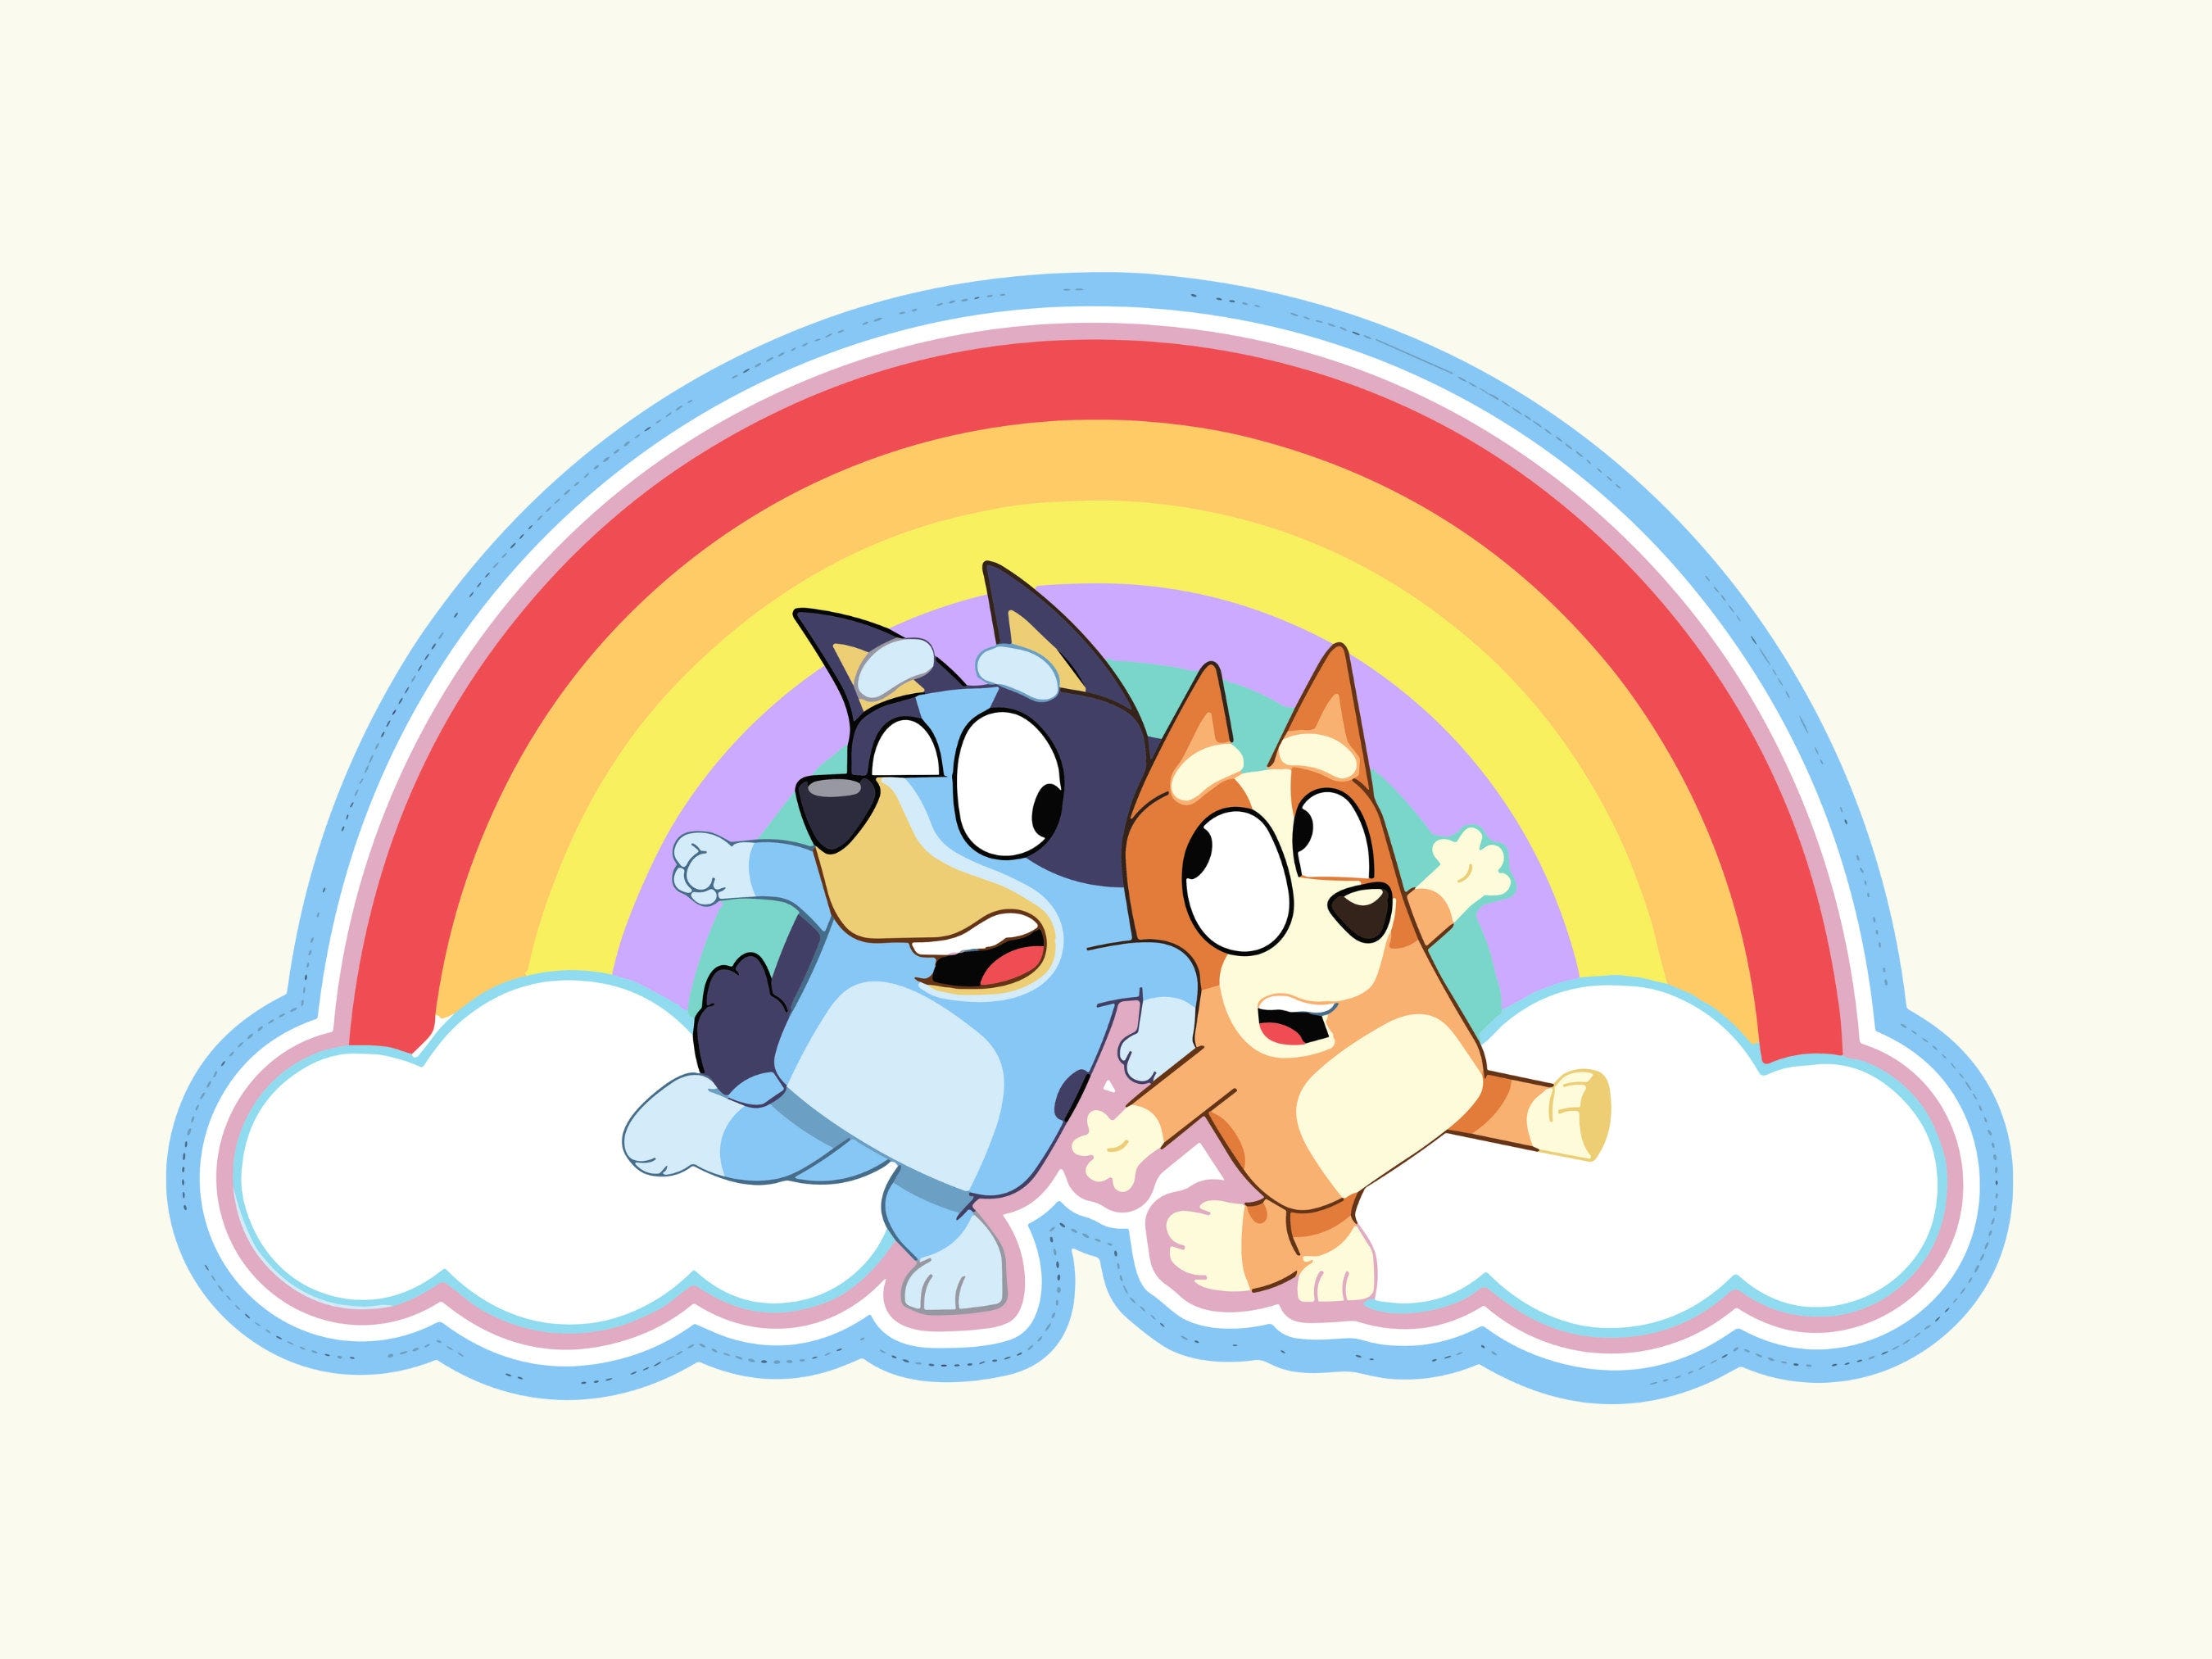 Bluey Rainbow Png, Bluey Friends Png, Bluey Png, Bluey Birthday Png, Bingo Png, Bluey Family Png, Bluey and friends Png